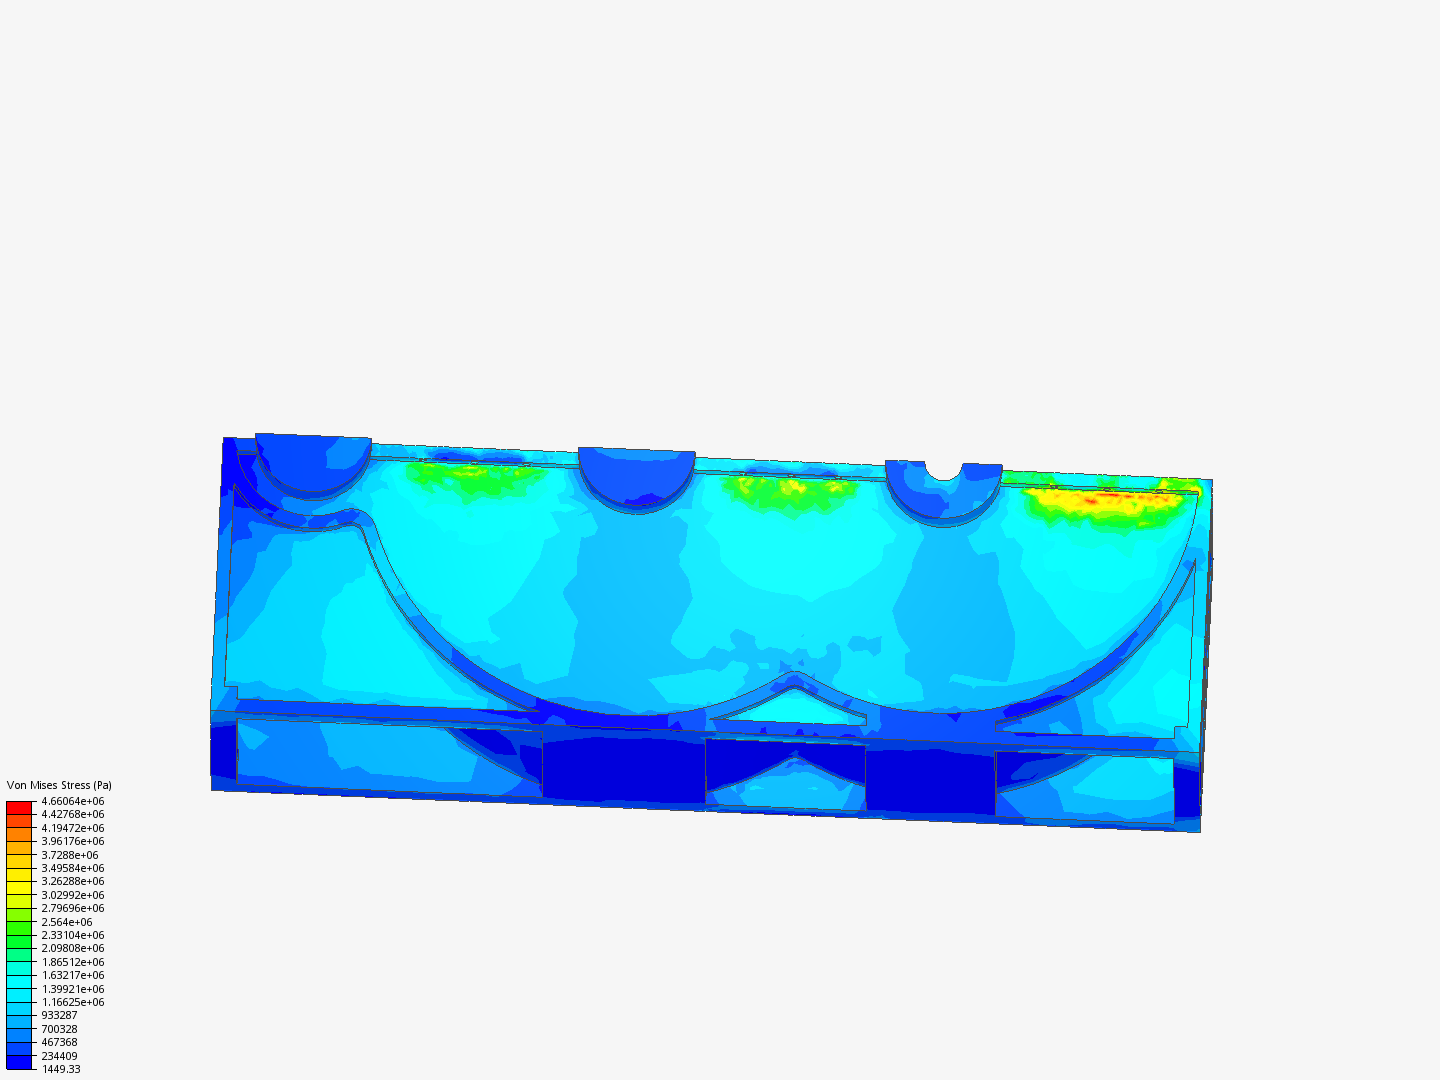 gearbox casing fea image